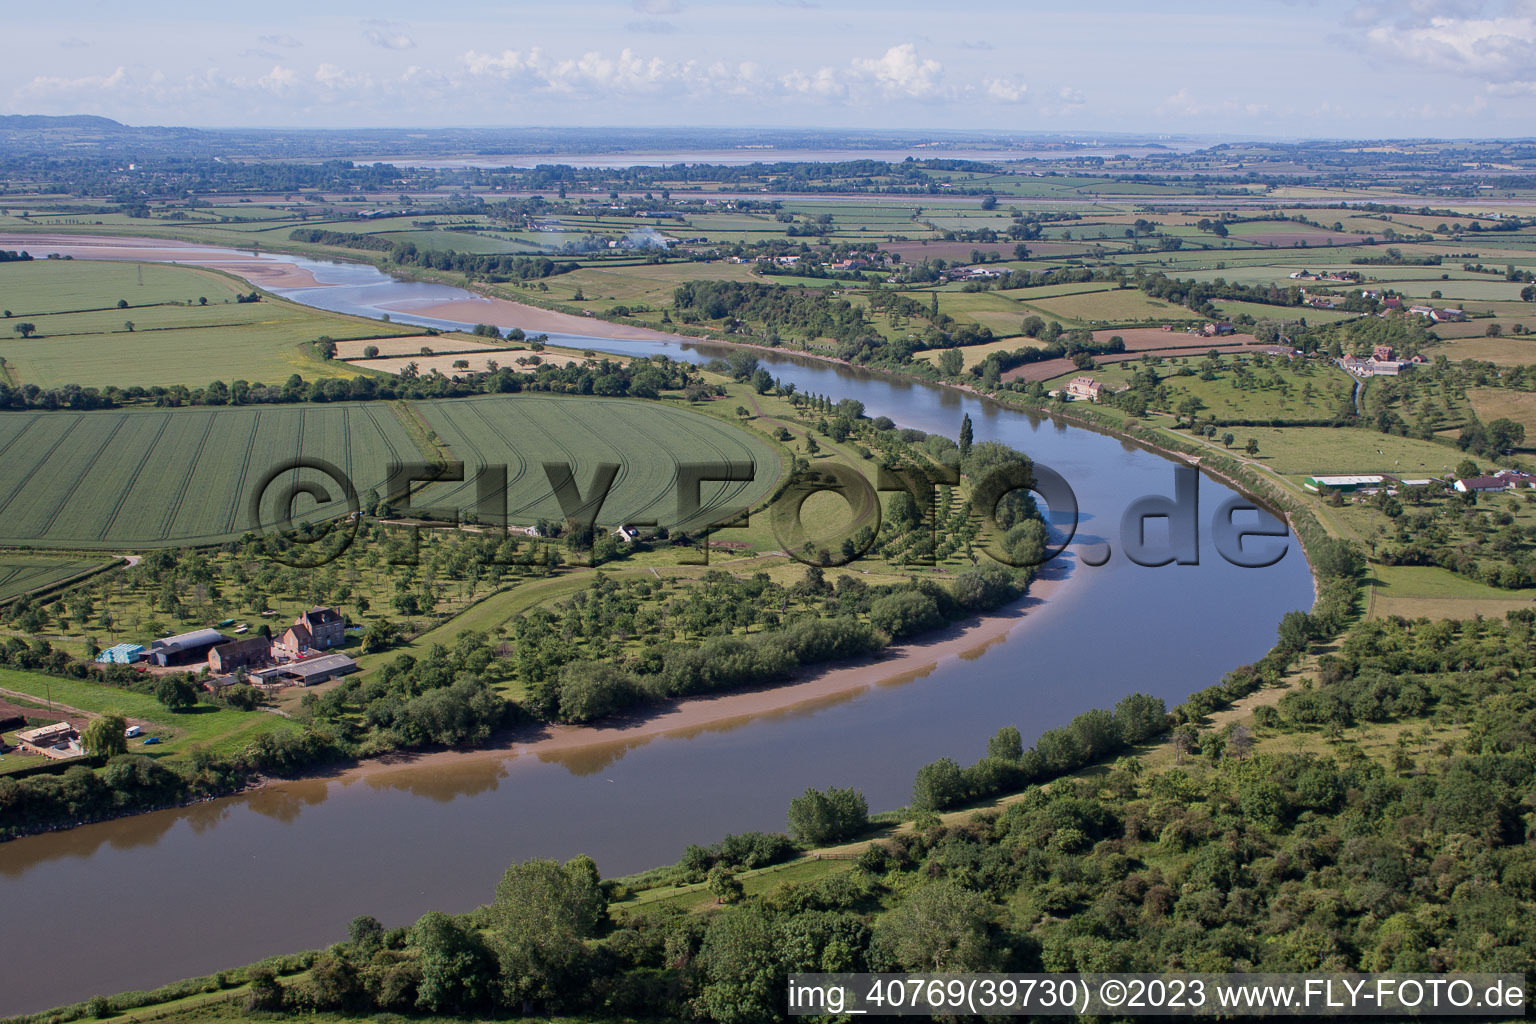 Oblique view of Knee of the River Severn near Oakle Street in Oakle Street in the state England, Great Britain